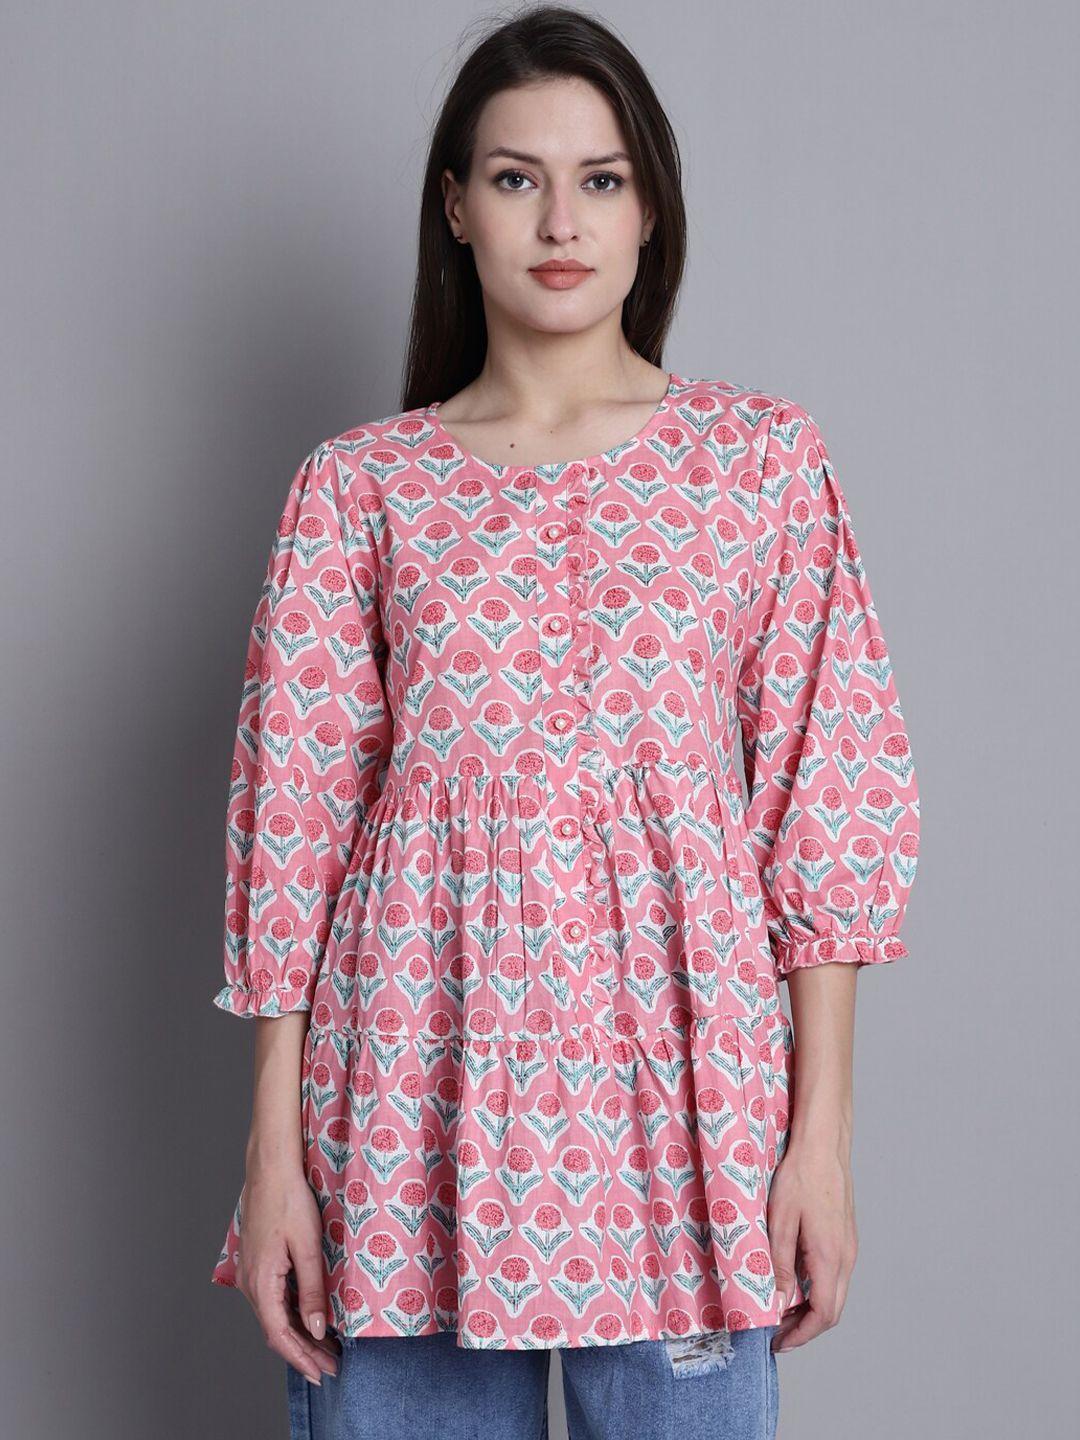 roly poly floral print cotton empire longline top